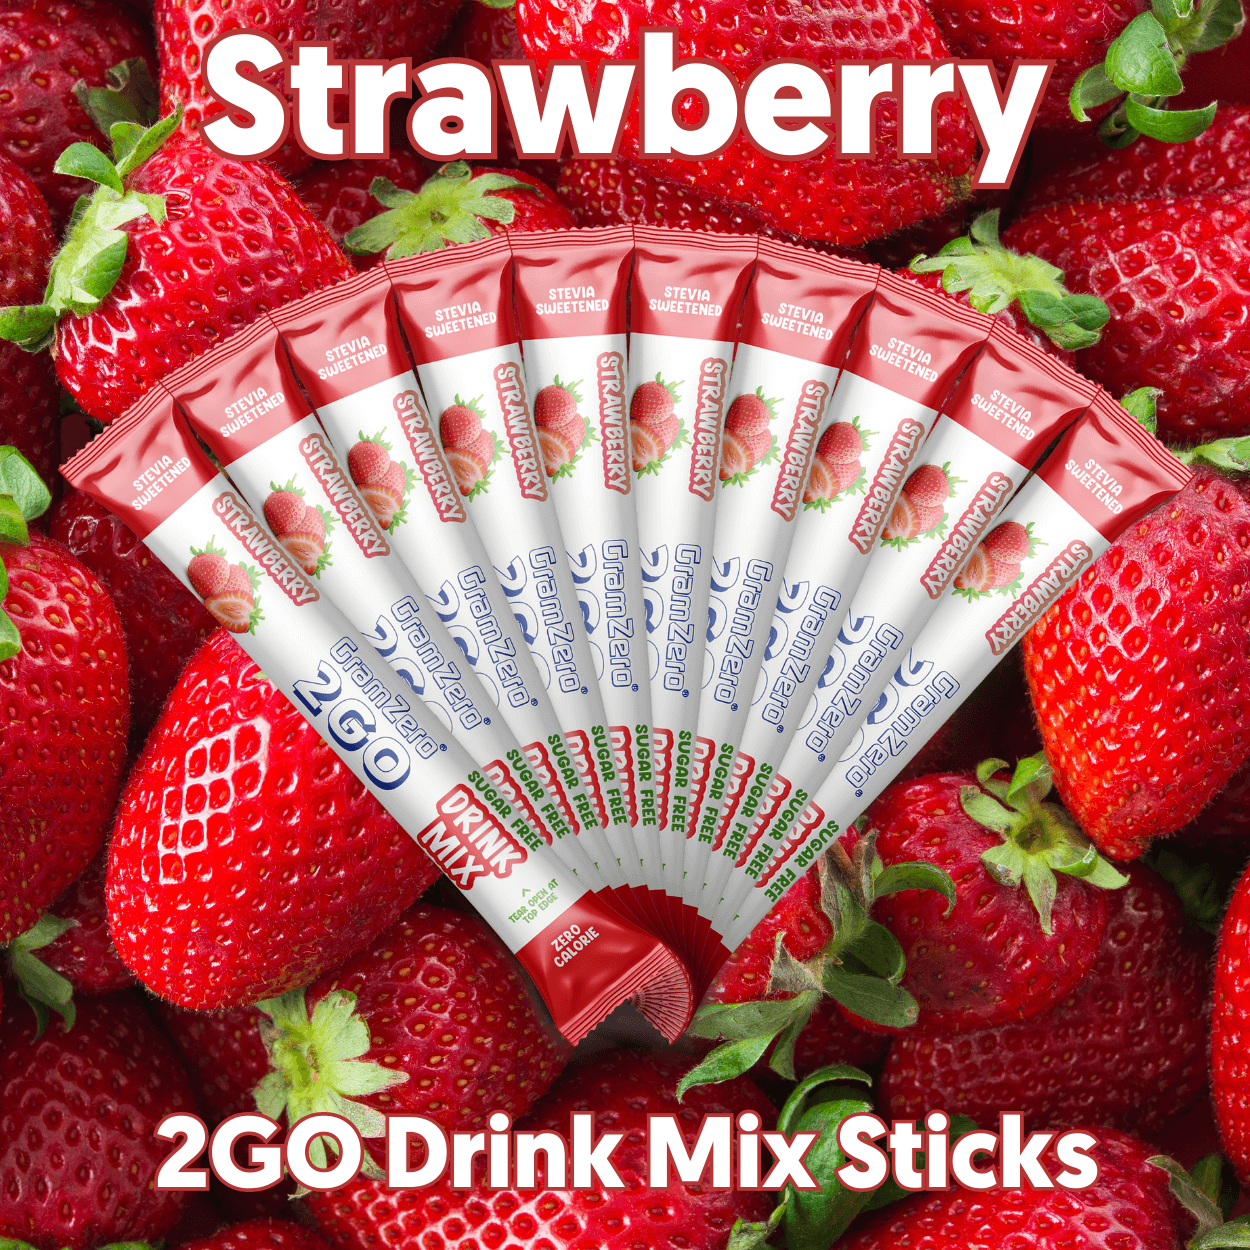 STRAWBERRY 2GO Sugar Free Drink Mix Sticks: 10 Pack ~ Great for Loaded Tea Kits